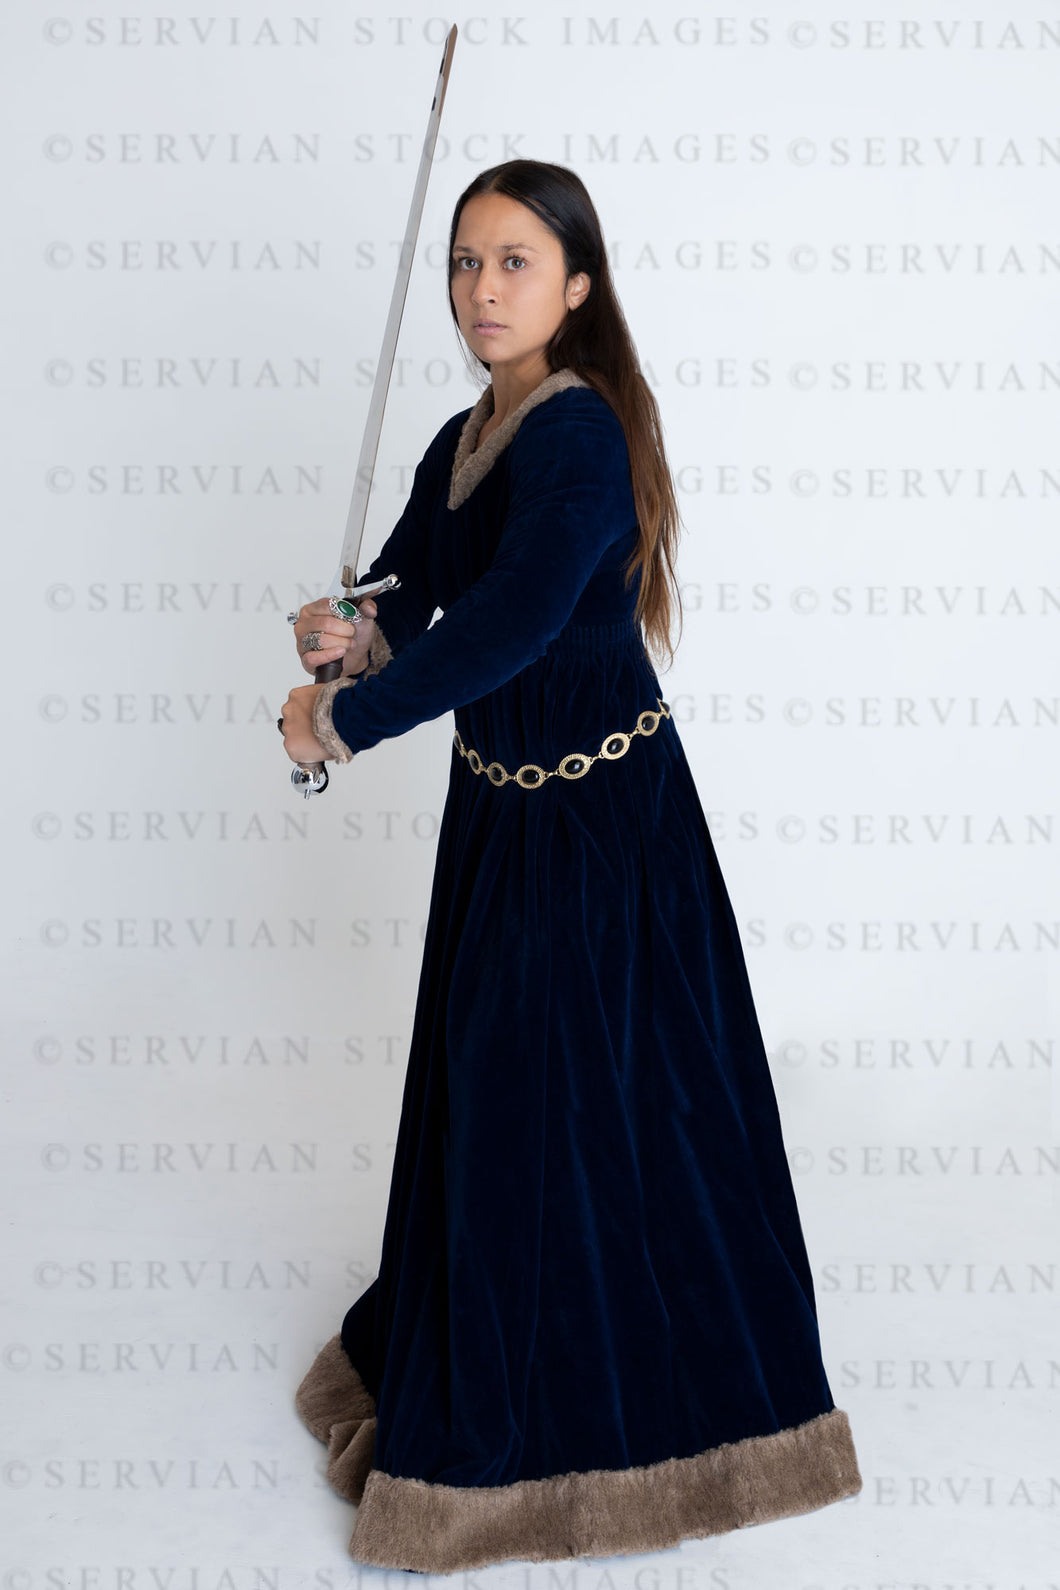 Medieval or high fantasy woman wearing a velvet dress and holding a sword (Sylvia 3304)